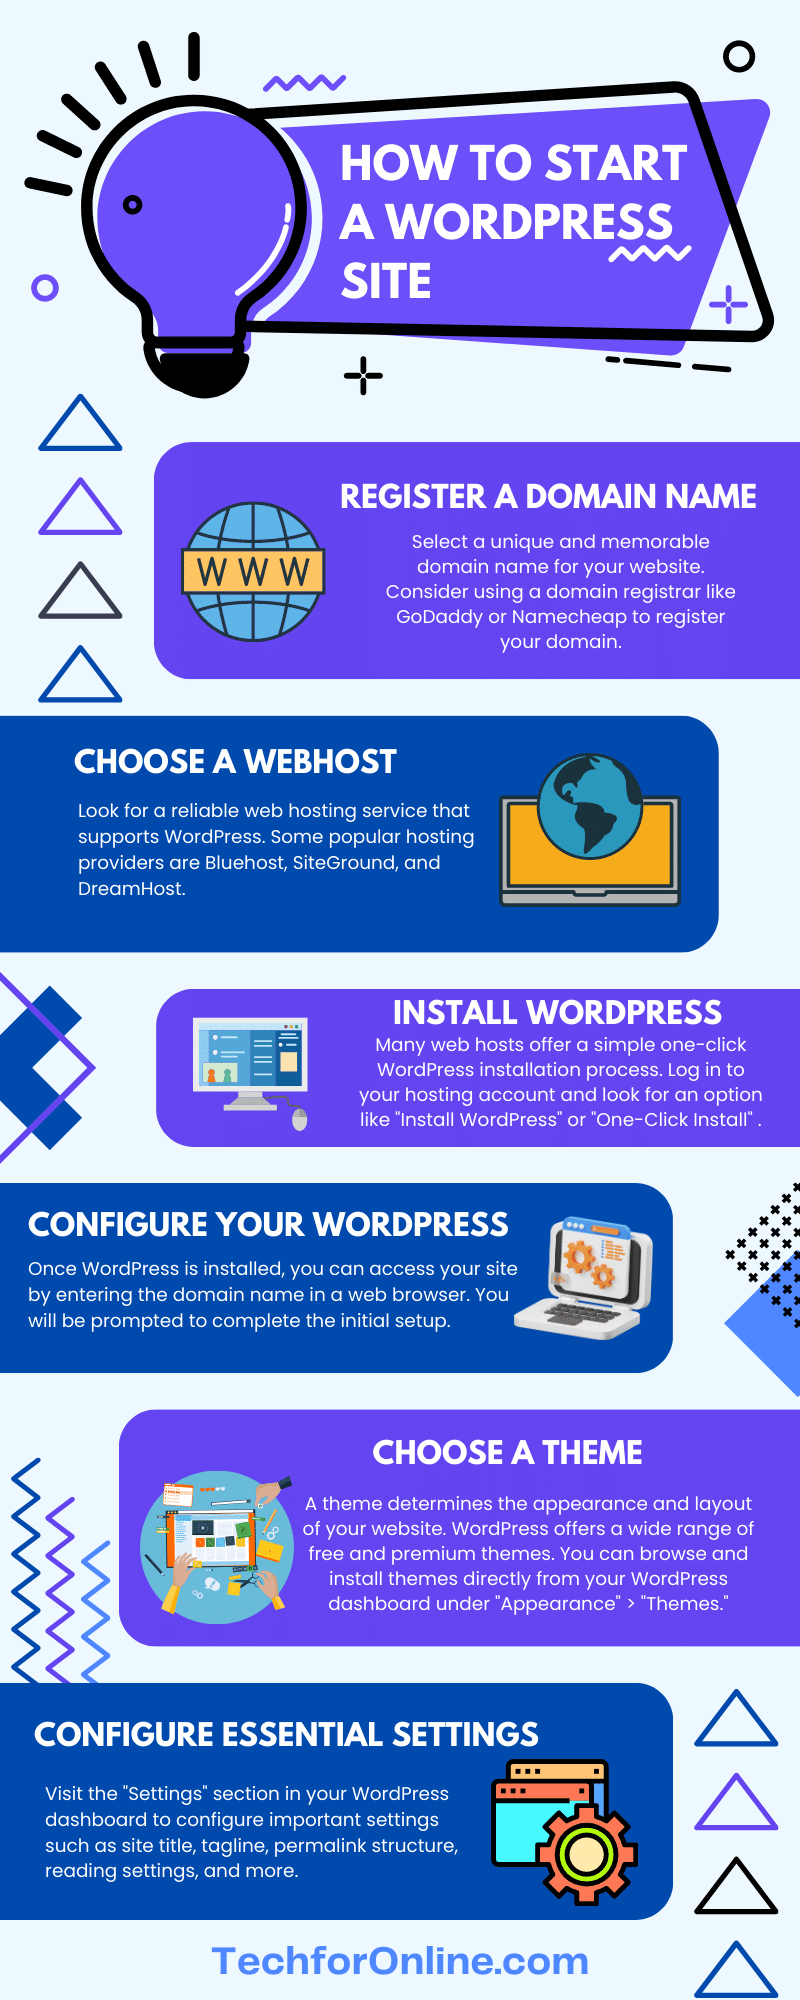 How to start a WordPress site